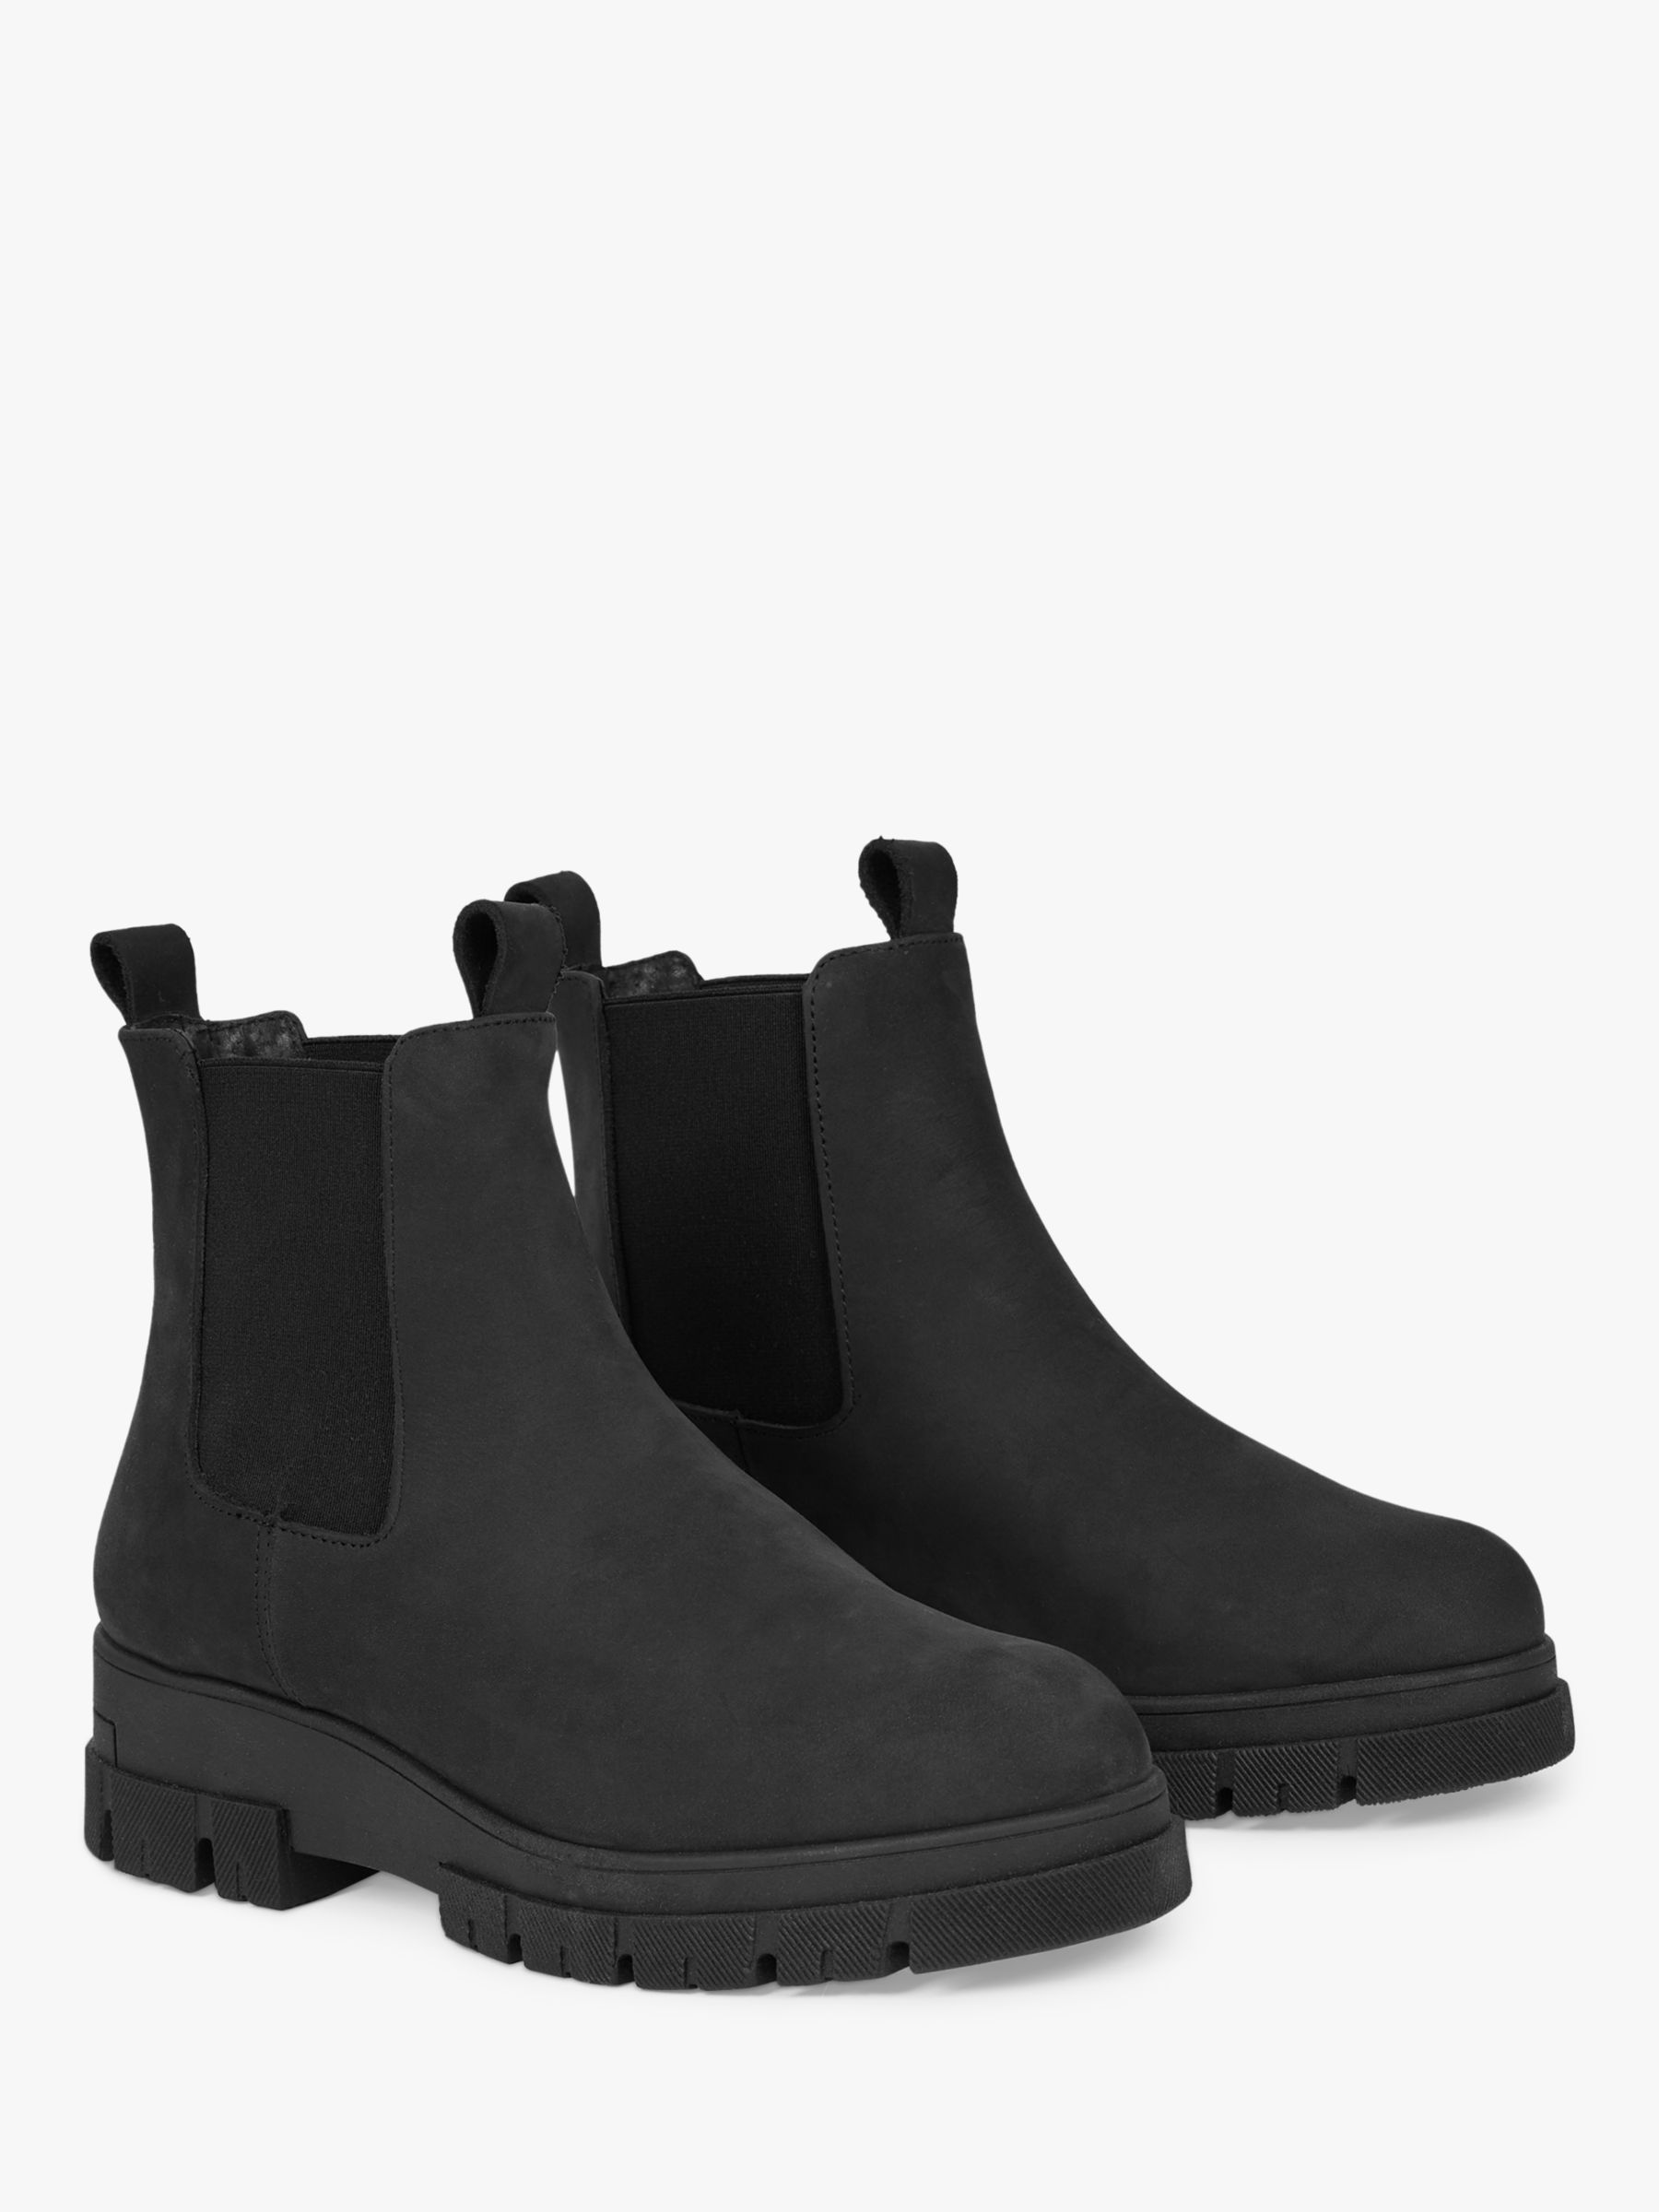 Celtic & Co. Leather Chunky Chelsea Ankle Boots, Black at John Lewis ...